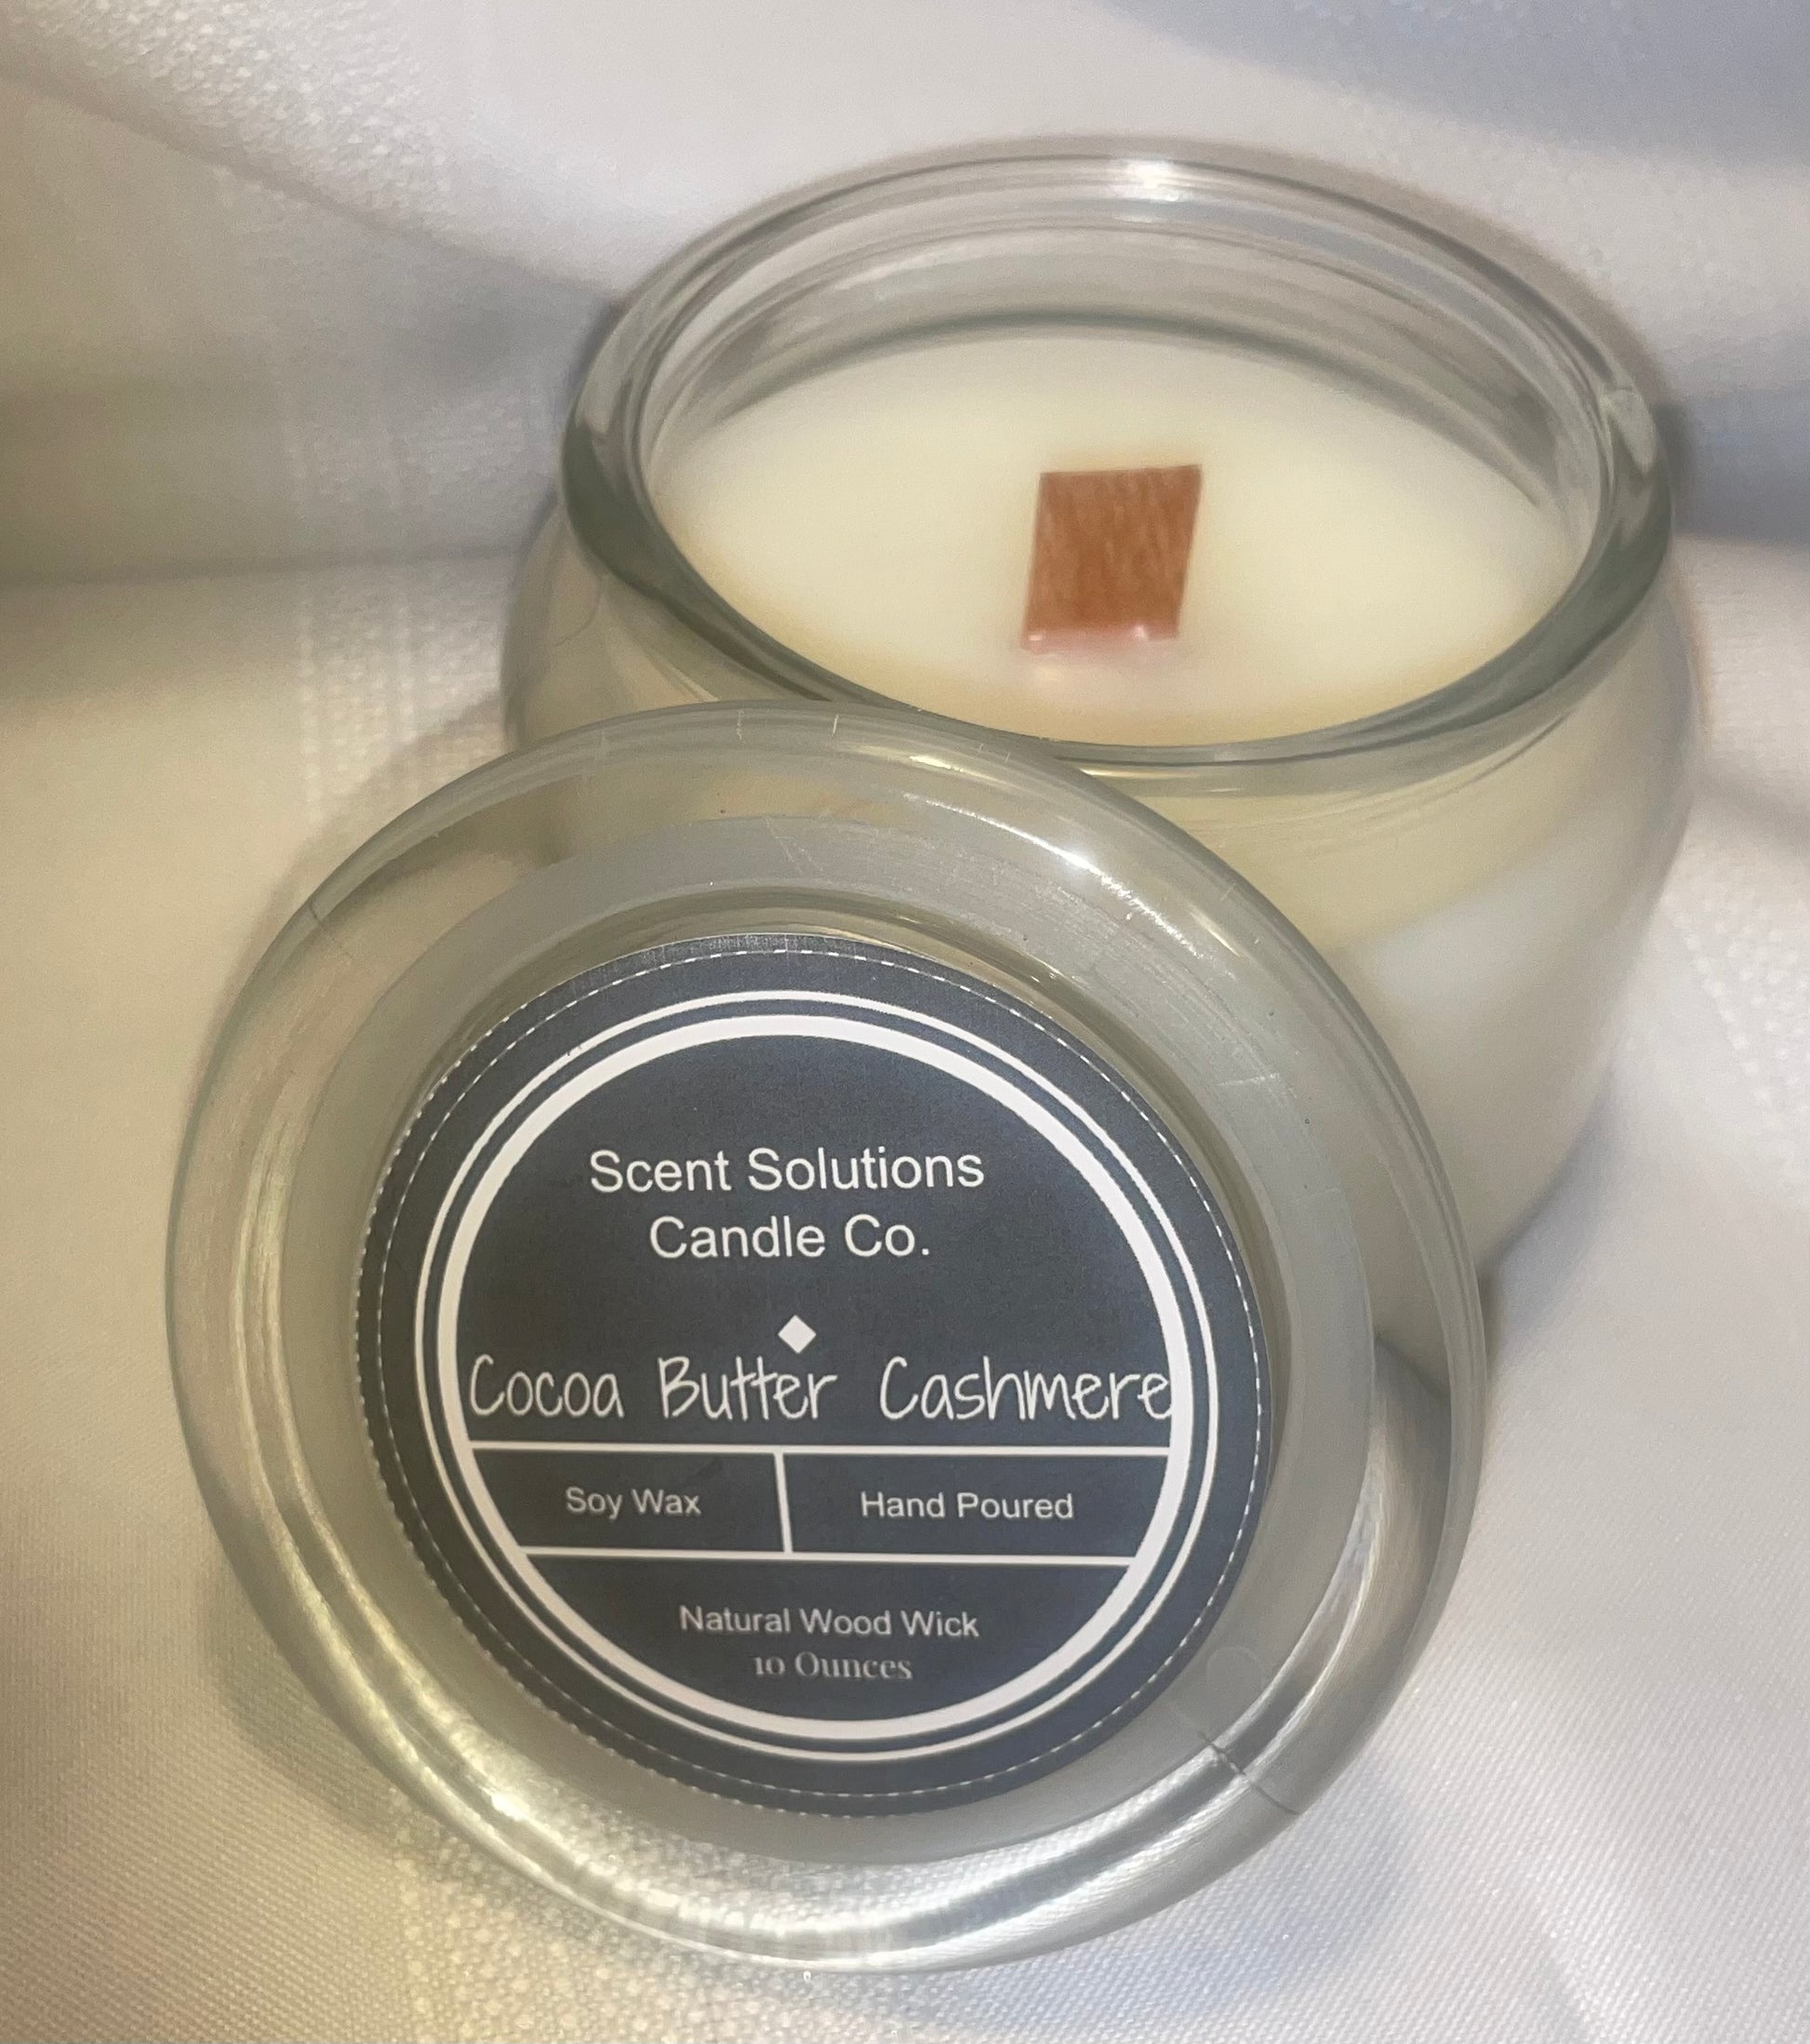 Cocoa Butter Cashmere, Wooden Wick Candle 7 oz